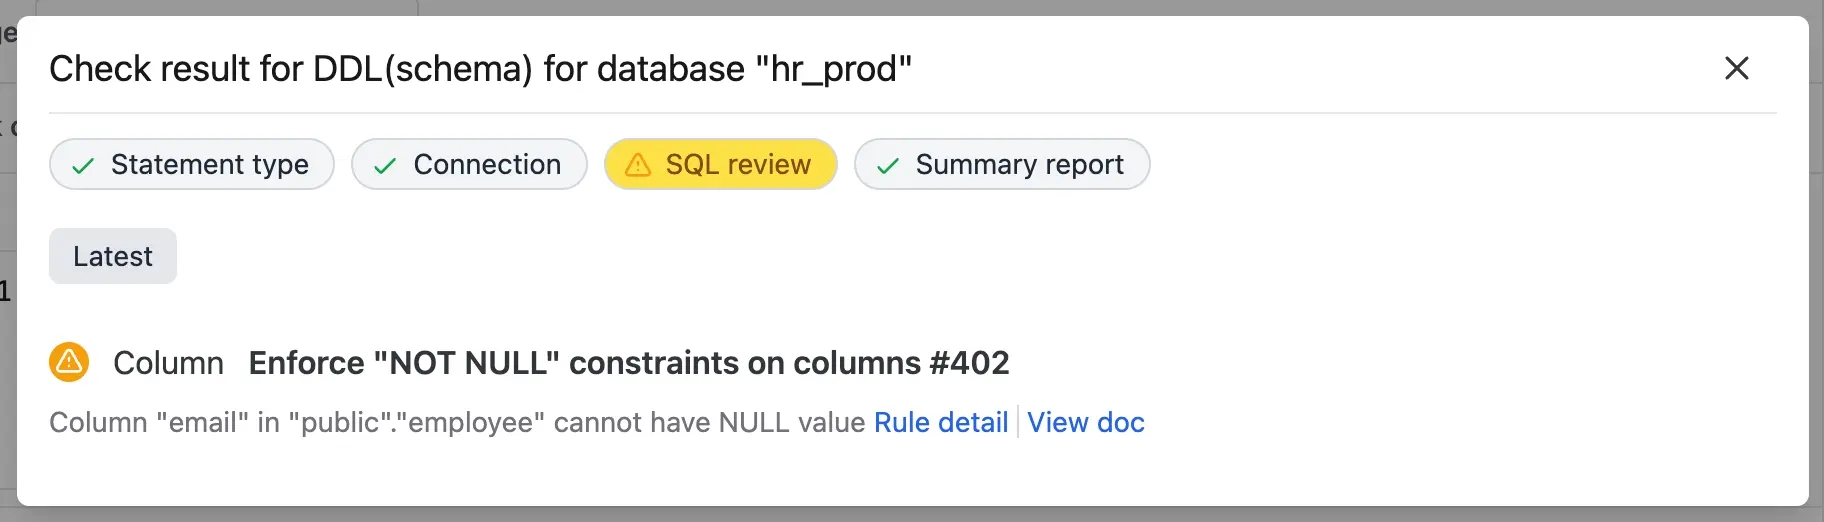 bb-sql-review-not-null